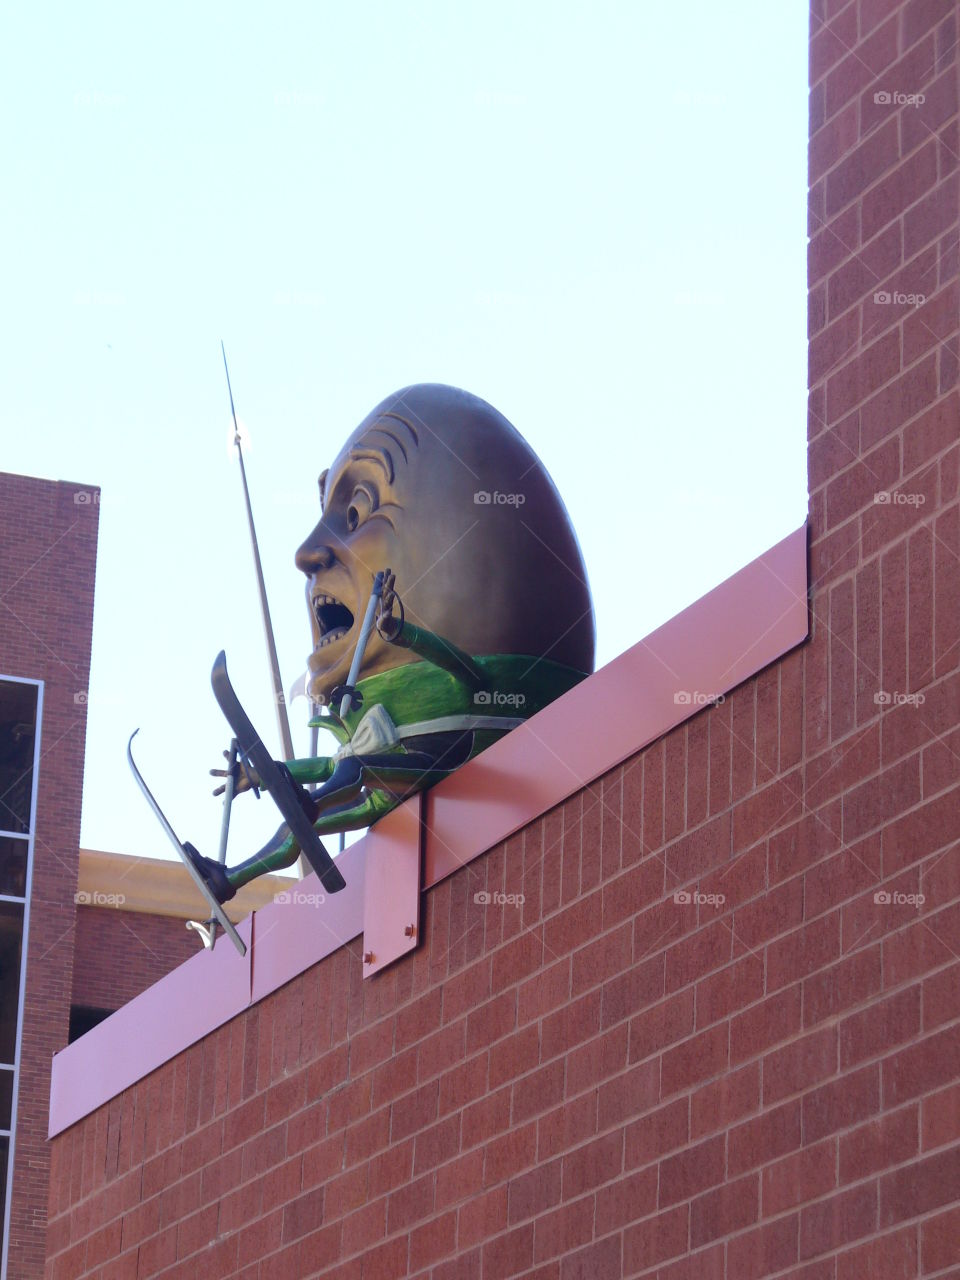 "Help me, I'm going down" said a egg in Colorado Springs